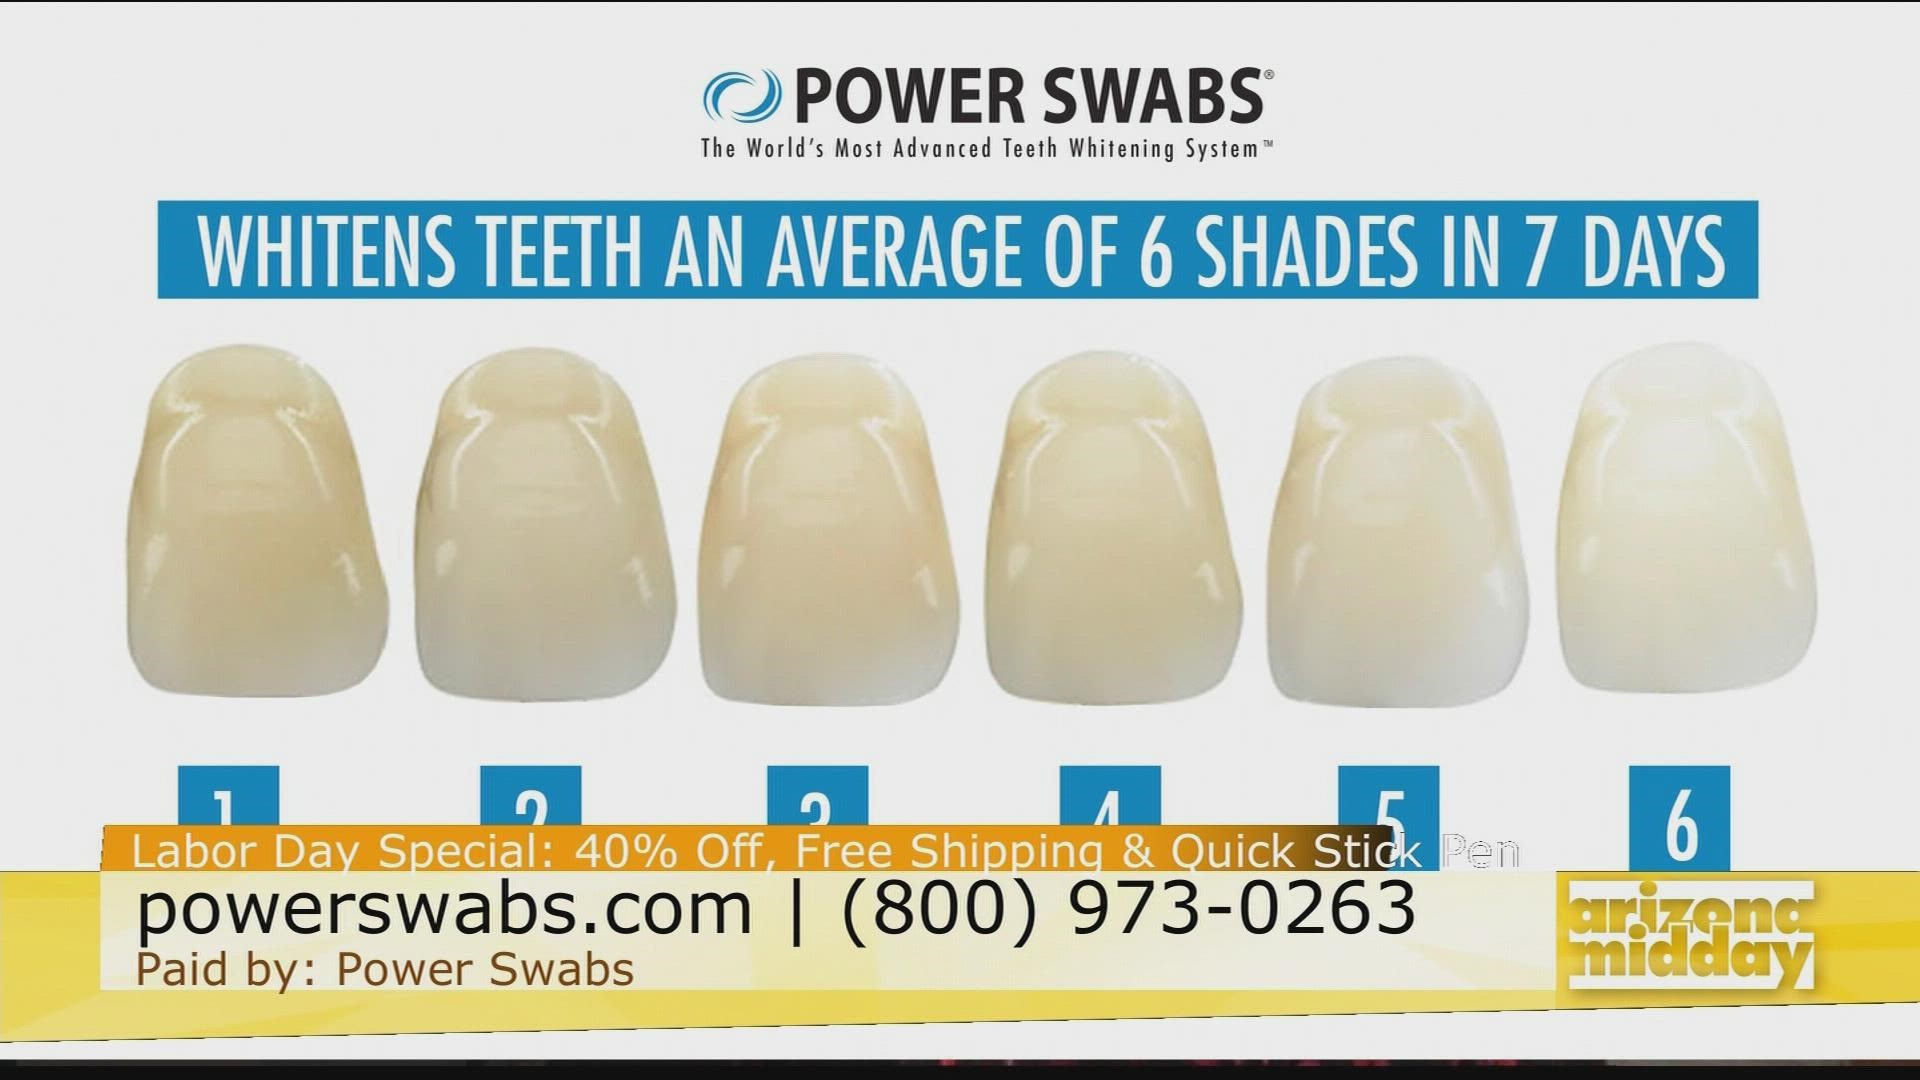 Annette Figueroa has the scoop on how a bright smile can take years of your appearance. Check out Power Swabs with this Labor Day Special.